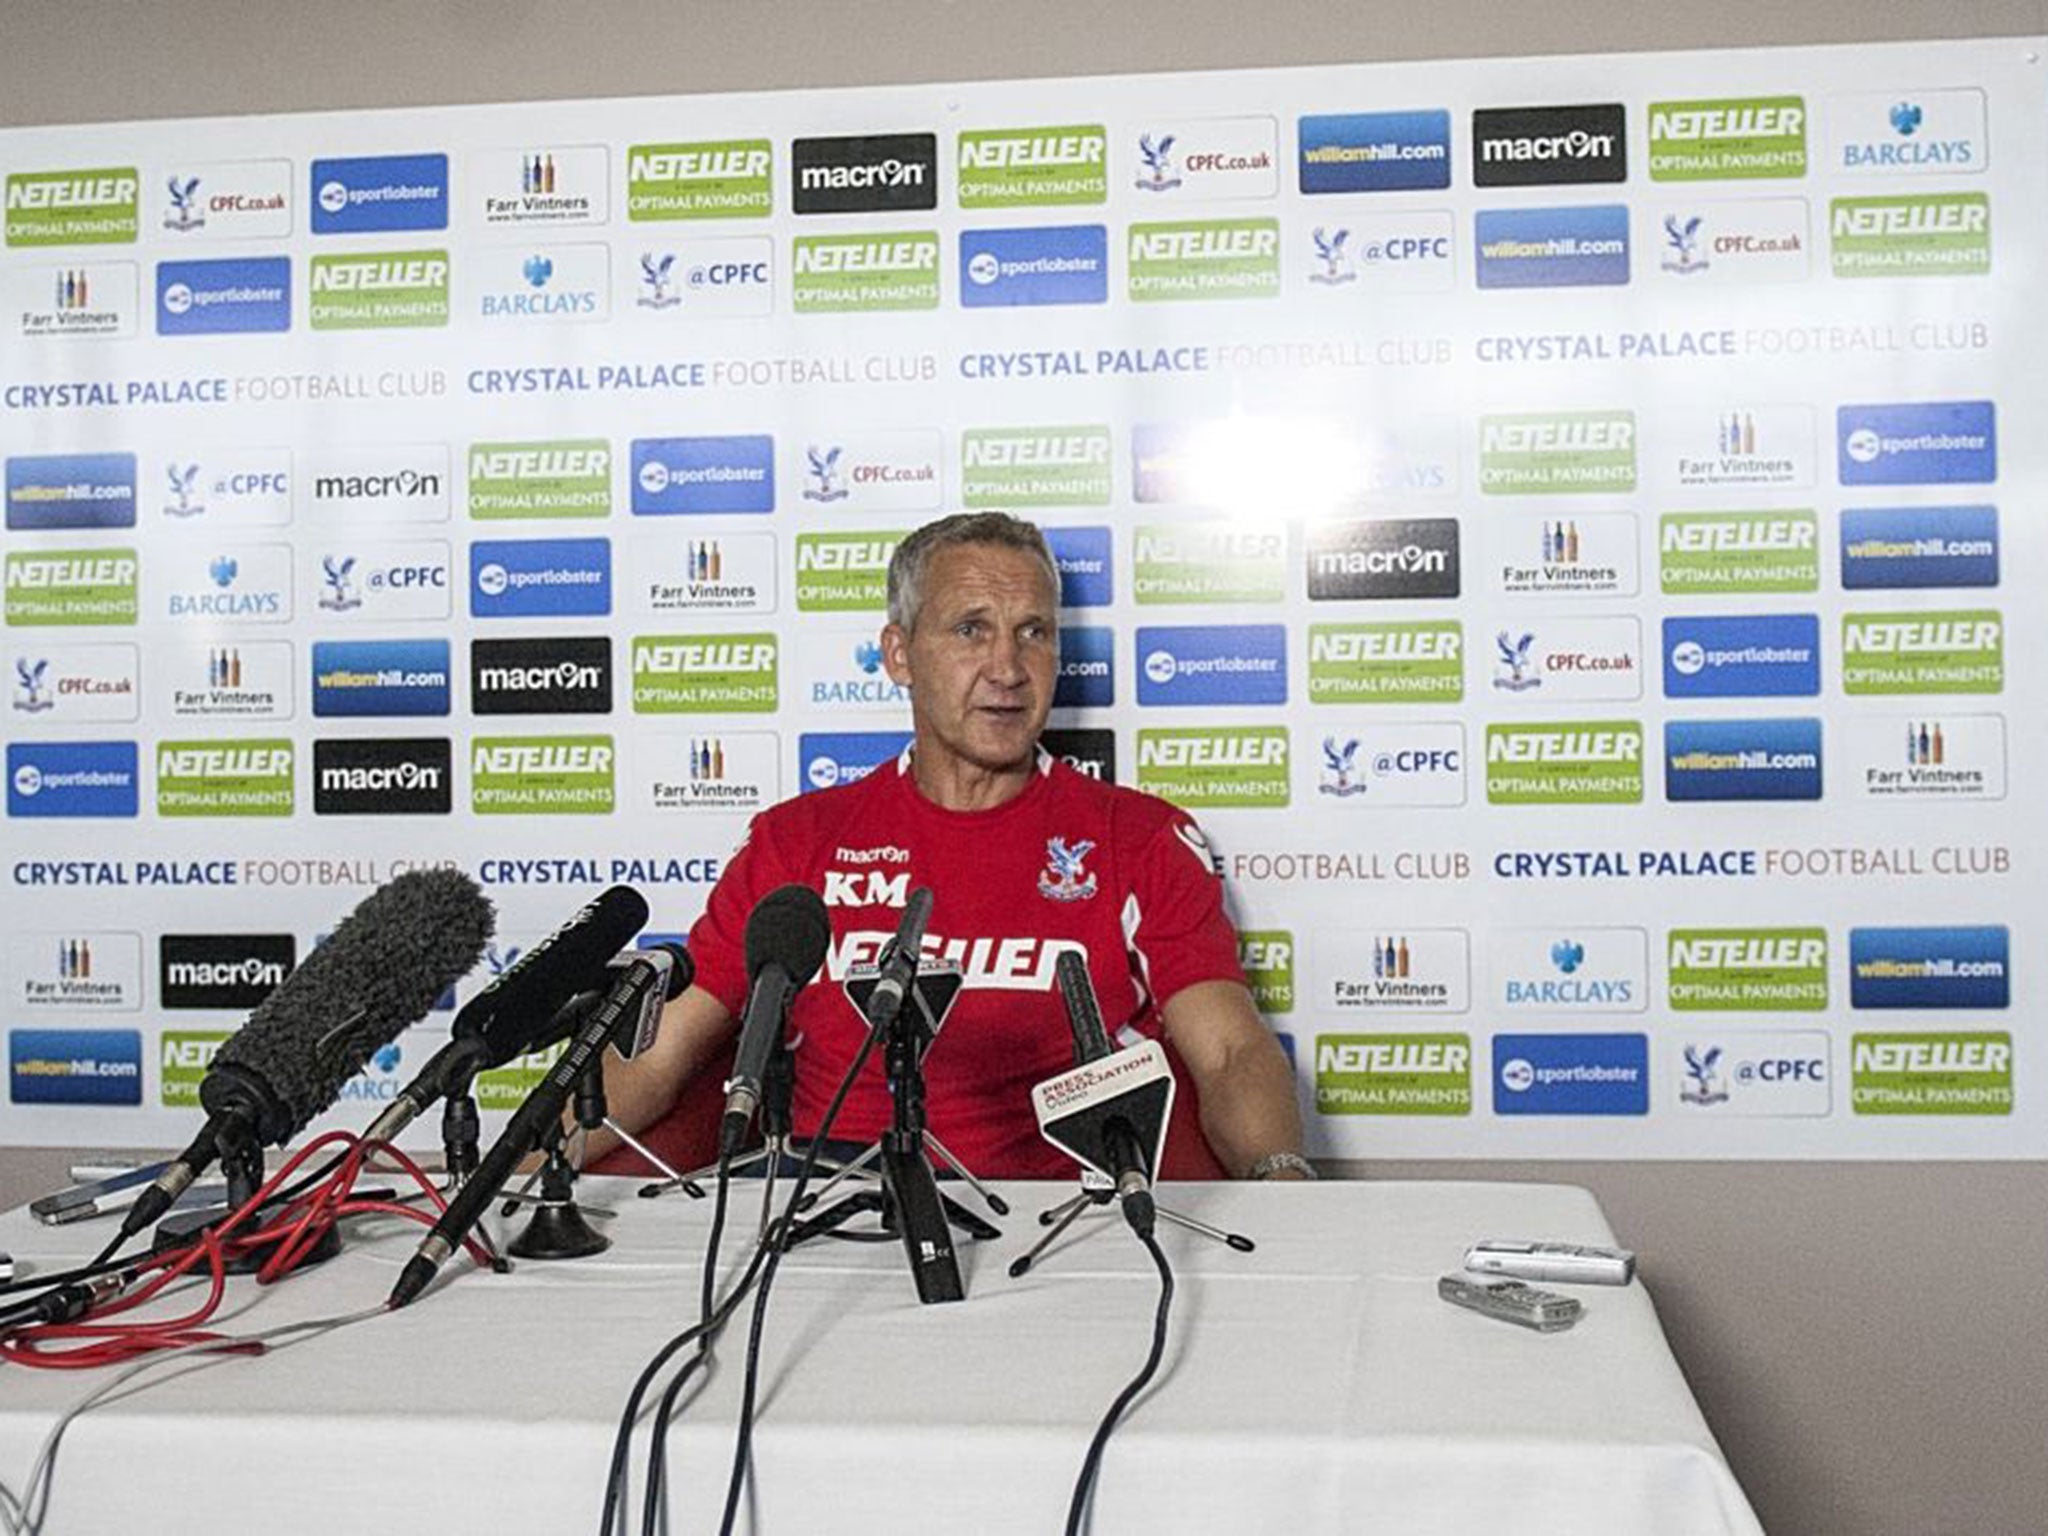 Keith Millen will take caretaker charge of Crystal Palace after Tony Pulis' shock exit